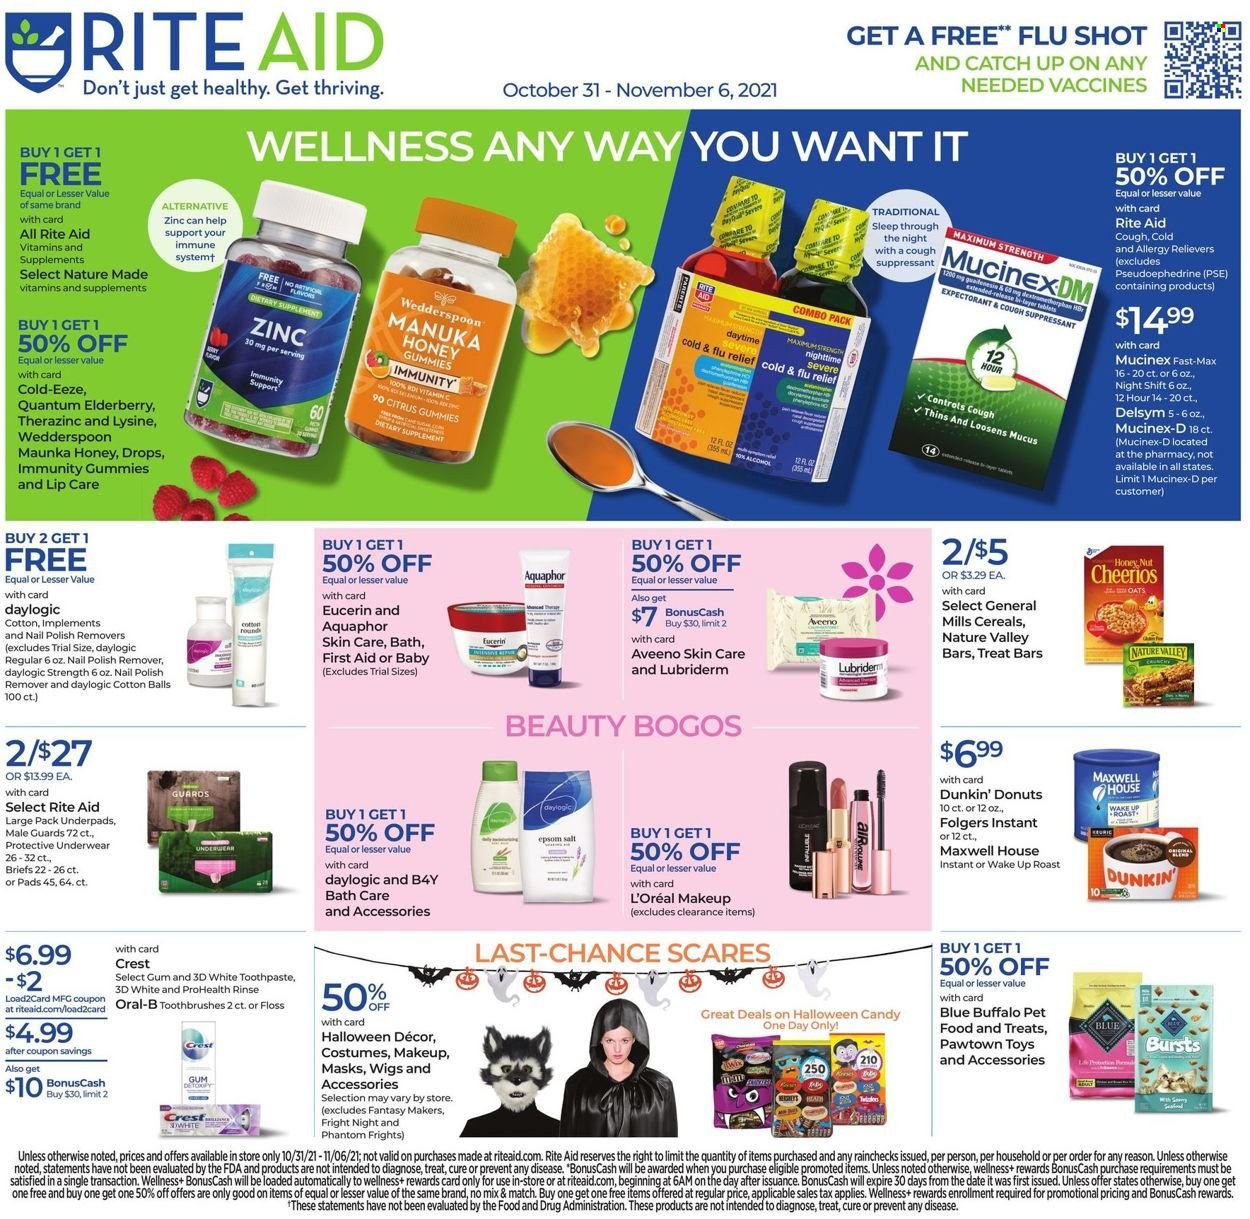 thumbnail - RITE AID Flyer - 10/31/2021 - 11/06/2021 - Sales products - donut, Thins, oats, cereals, Cheerios, Nature Valley, Manuka Honey, Maxwell House, Folgers, Dunkin' Donuts, Aquaphor, Aveeno, cotton balls, Oral-B, toothpaste, Crest, L’Oréal, Daylogic, Brite, Eucerin, Lubriderm, nail polish remover, makeup, Blue Buffalo, Halloween, costume, Delsym, Cold & Flu, Mucinex, Nature Made, zinc, Cold-EEZE. Page 1.